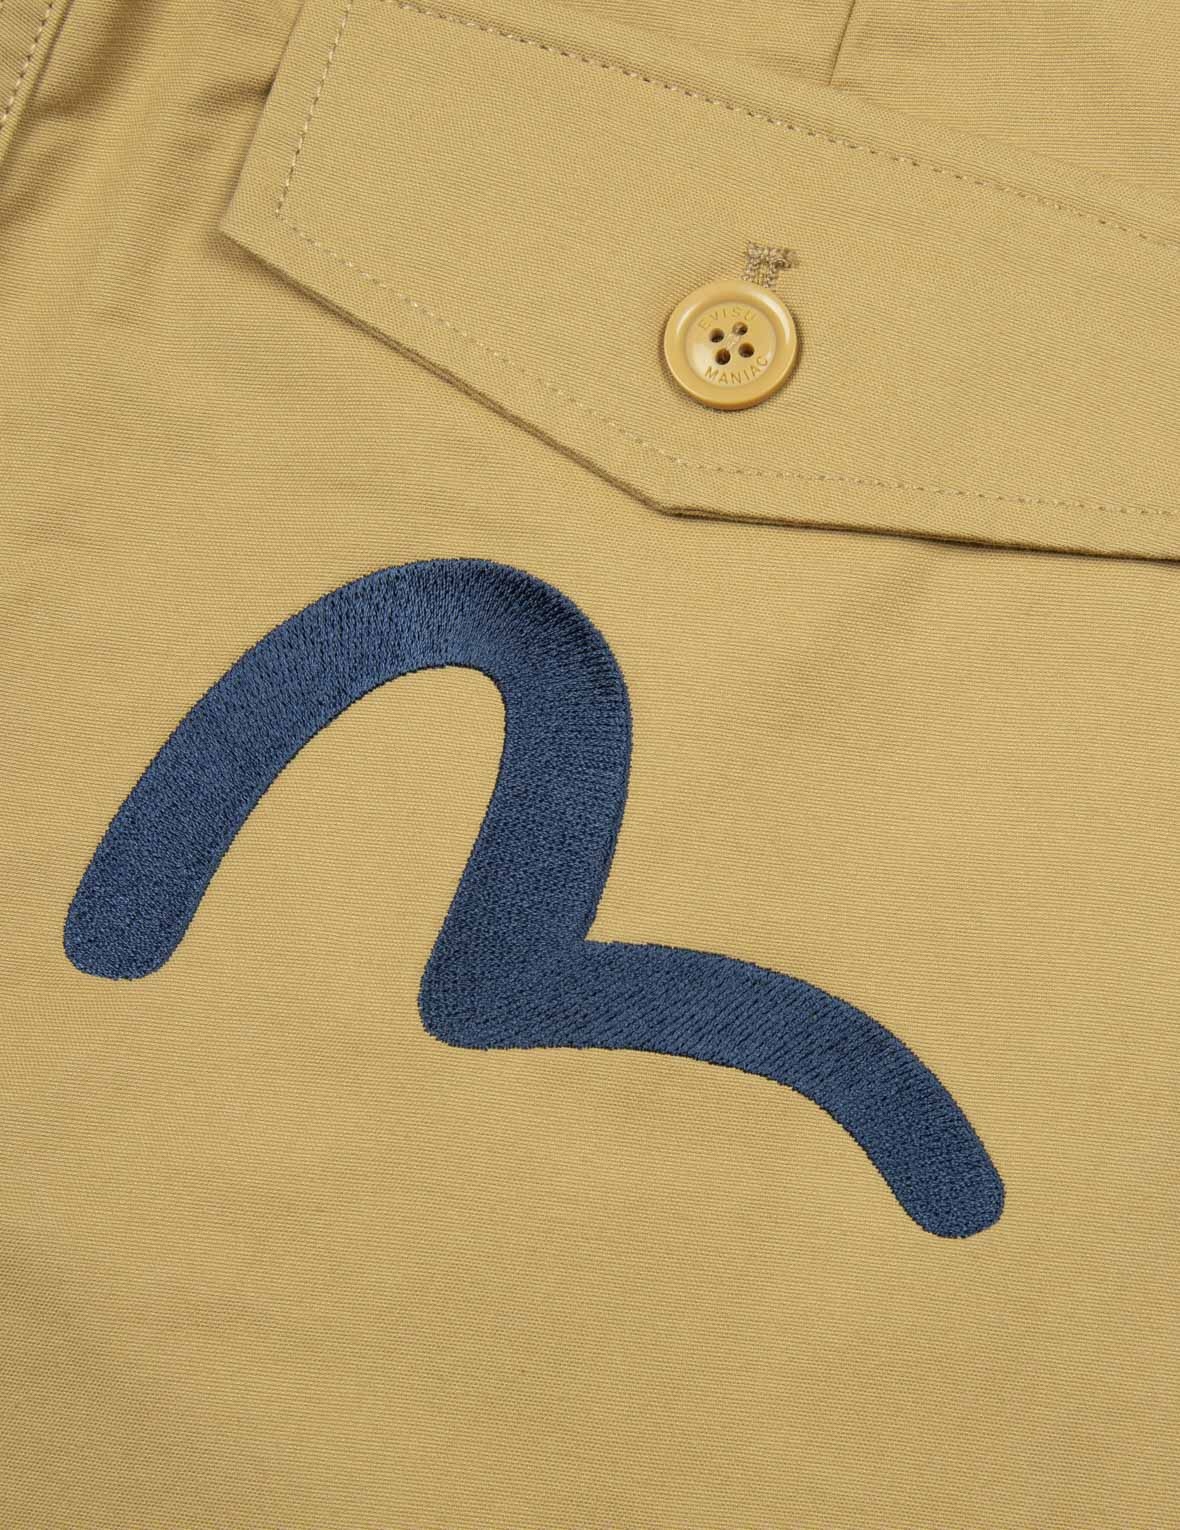 SEAGULL EMBROIDERY AND FLAG WOVEN LABELS RELAX FIT CHINO PANTS - 8